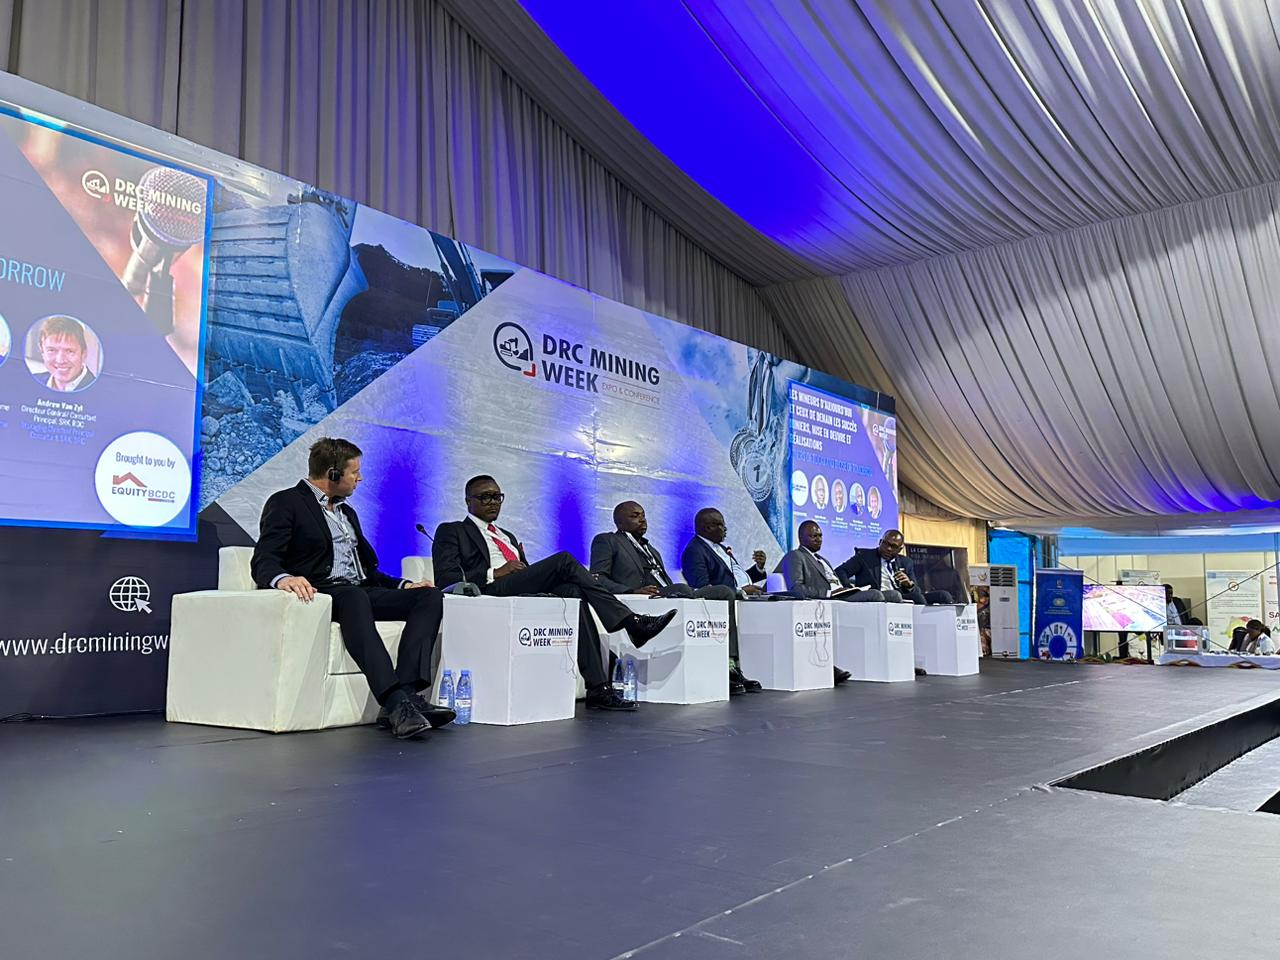 During the DRC Mining Week, SRK Consulting MD Andrew van Zyl sat in on a panel discussion regarding sustainable mining.